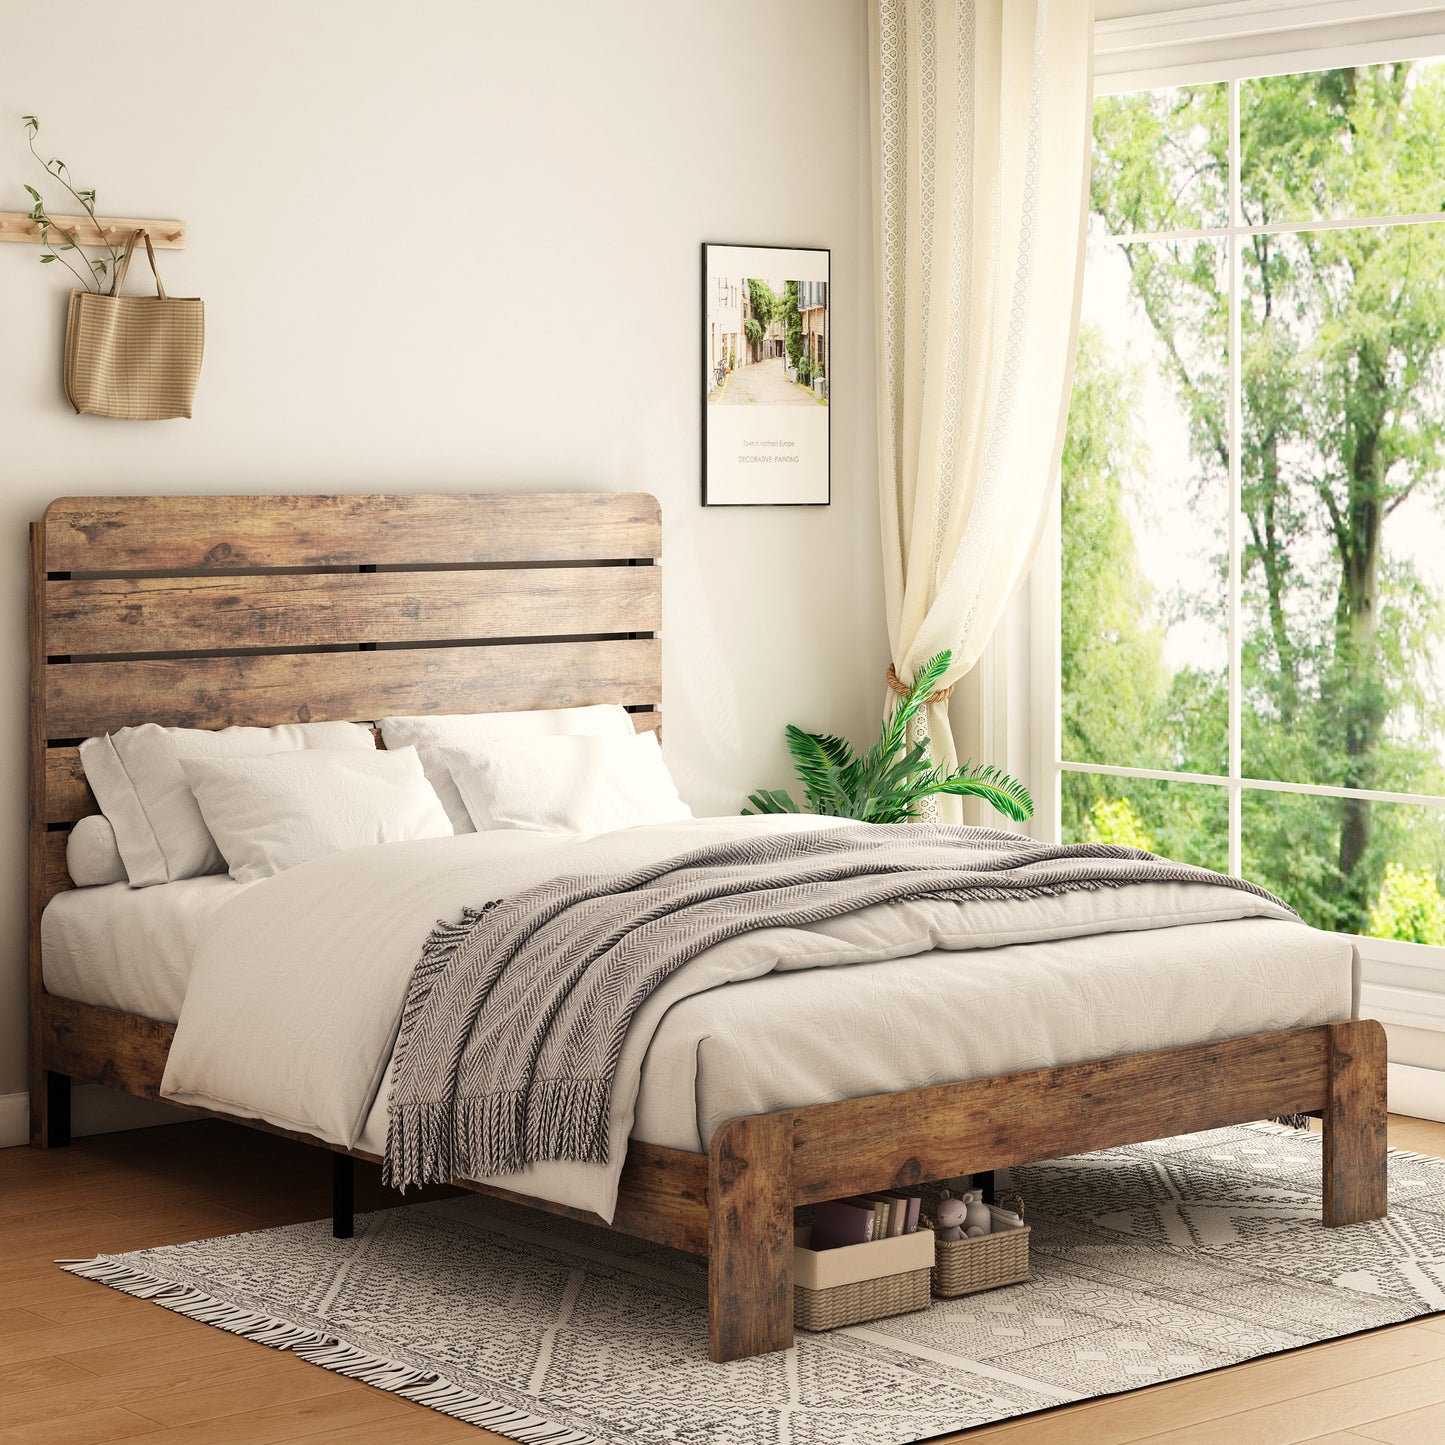 PAPROOS Full Size Bed Frame